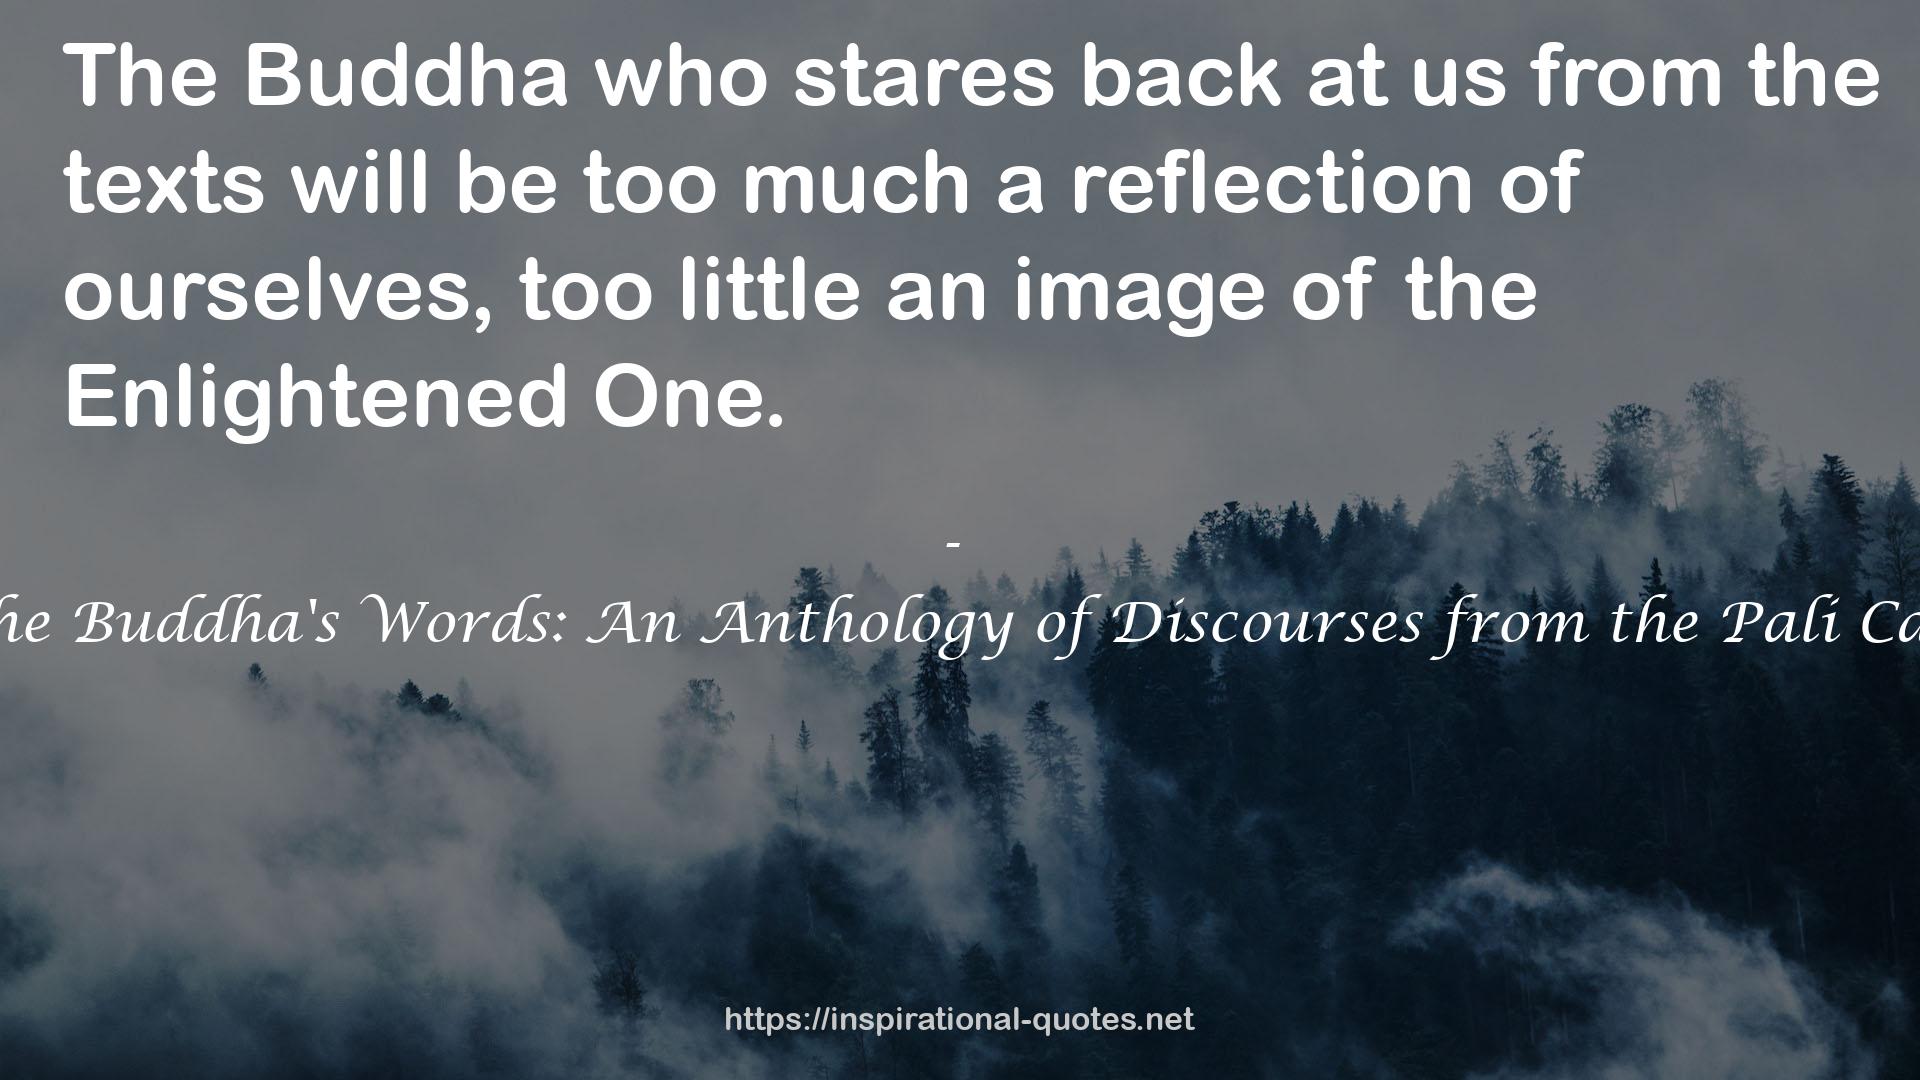 In the Buddha's Words: An Anthology of Discourses from the Pali Canon QUOTES